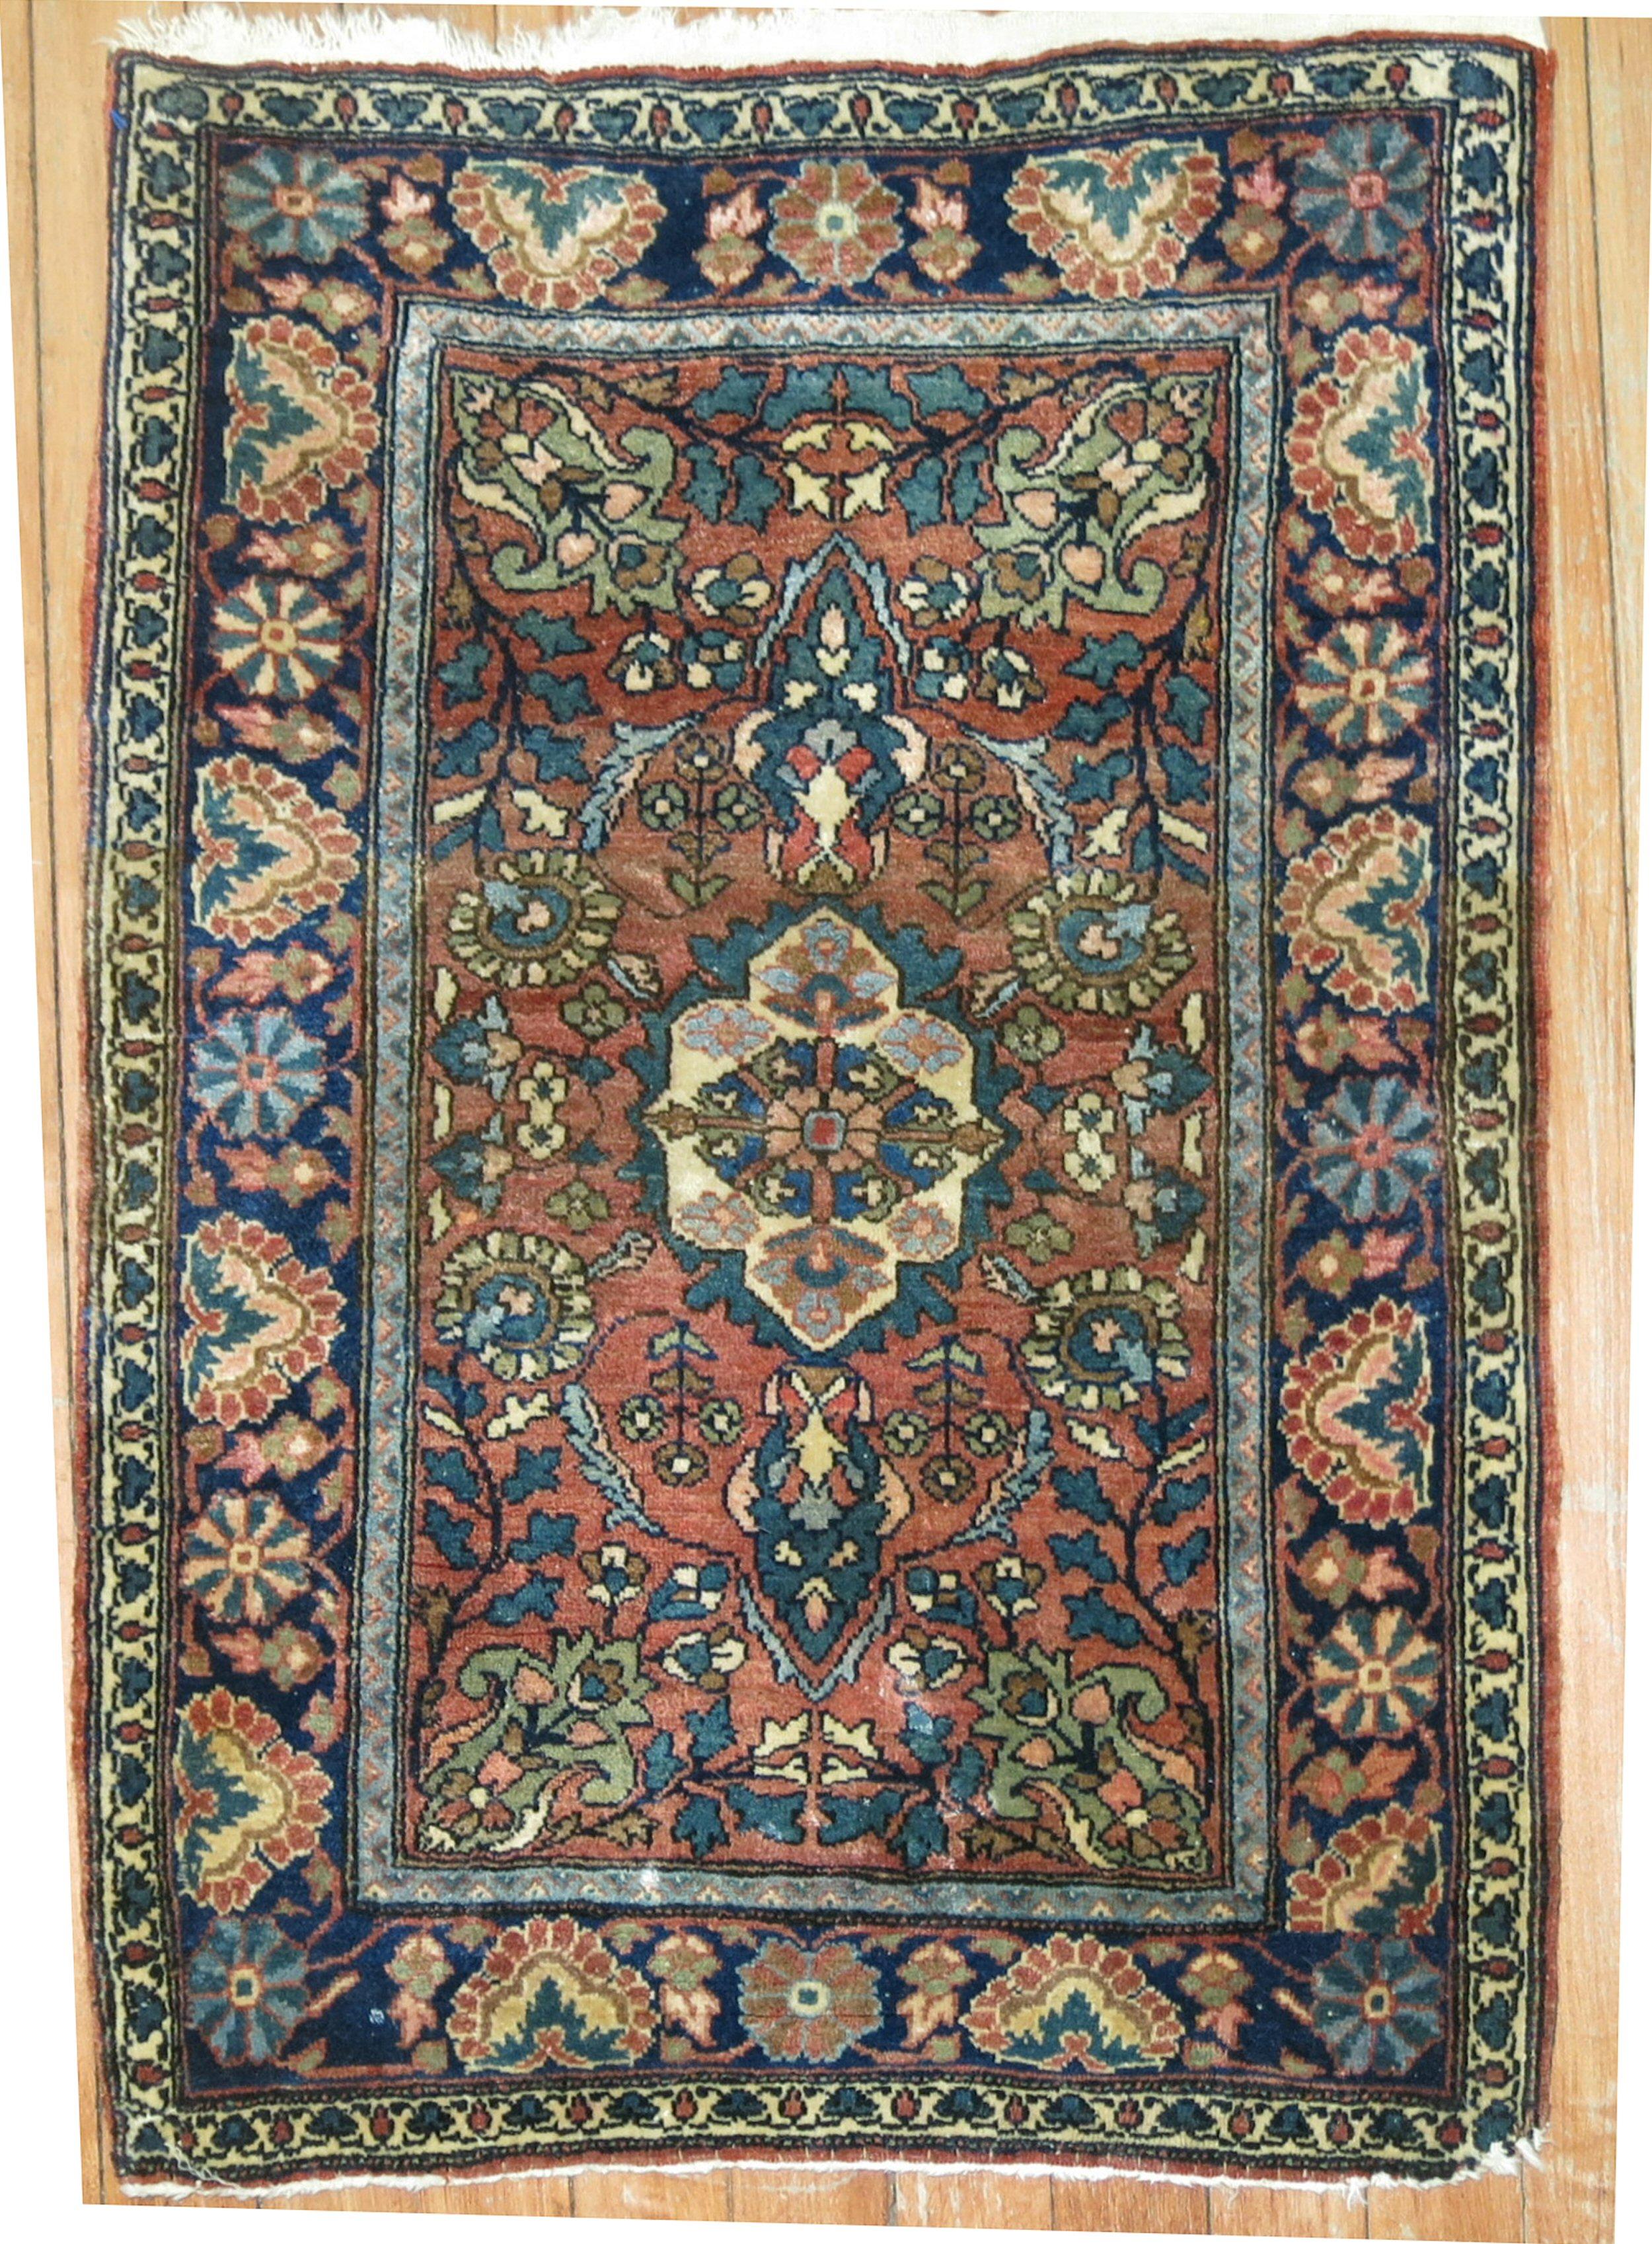 An early 20th-century high collectible Persian Sarouk Farahan rug with an ornate palette in earth tones

Measures: 1'9'' x 2'6”.

